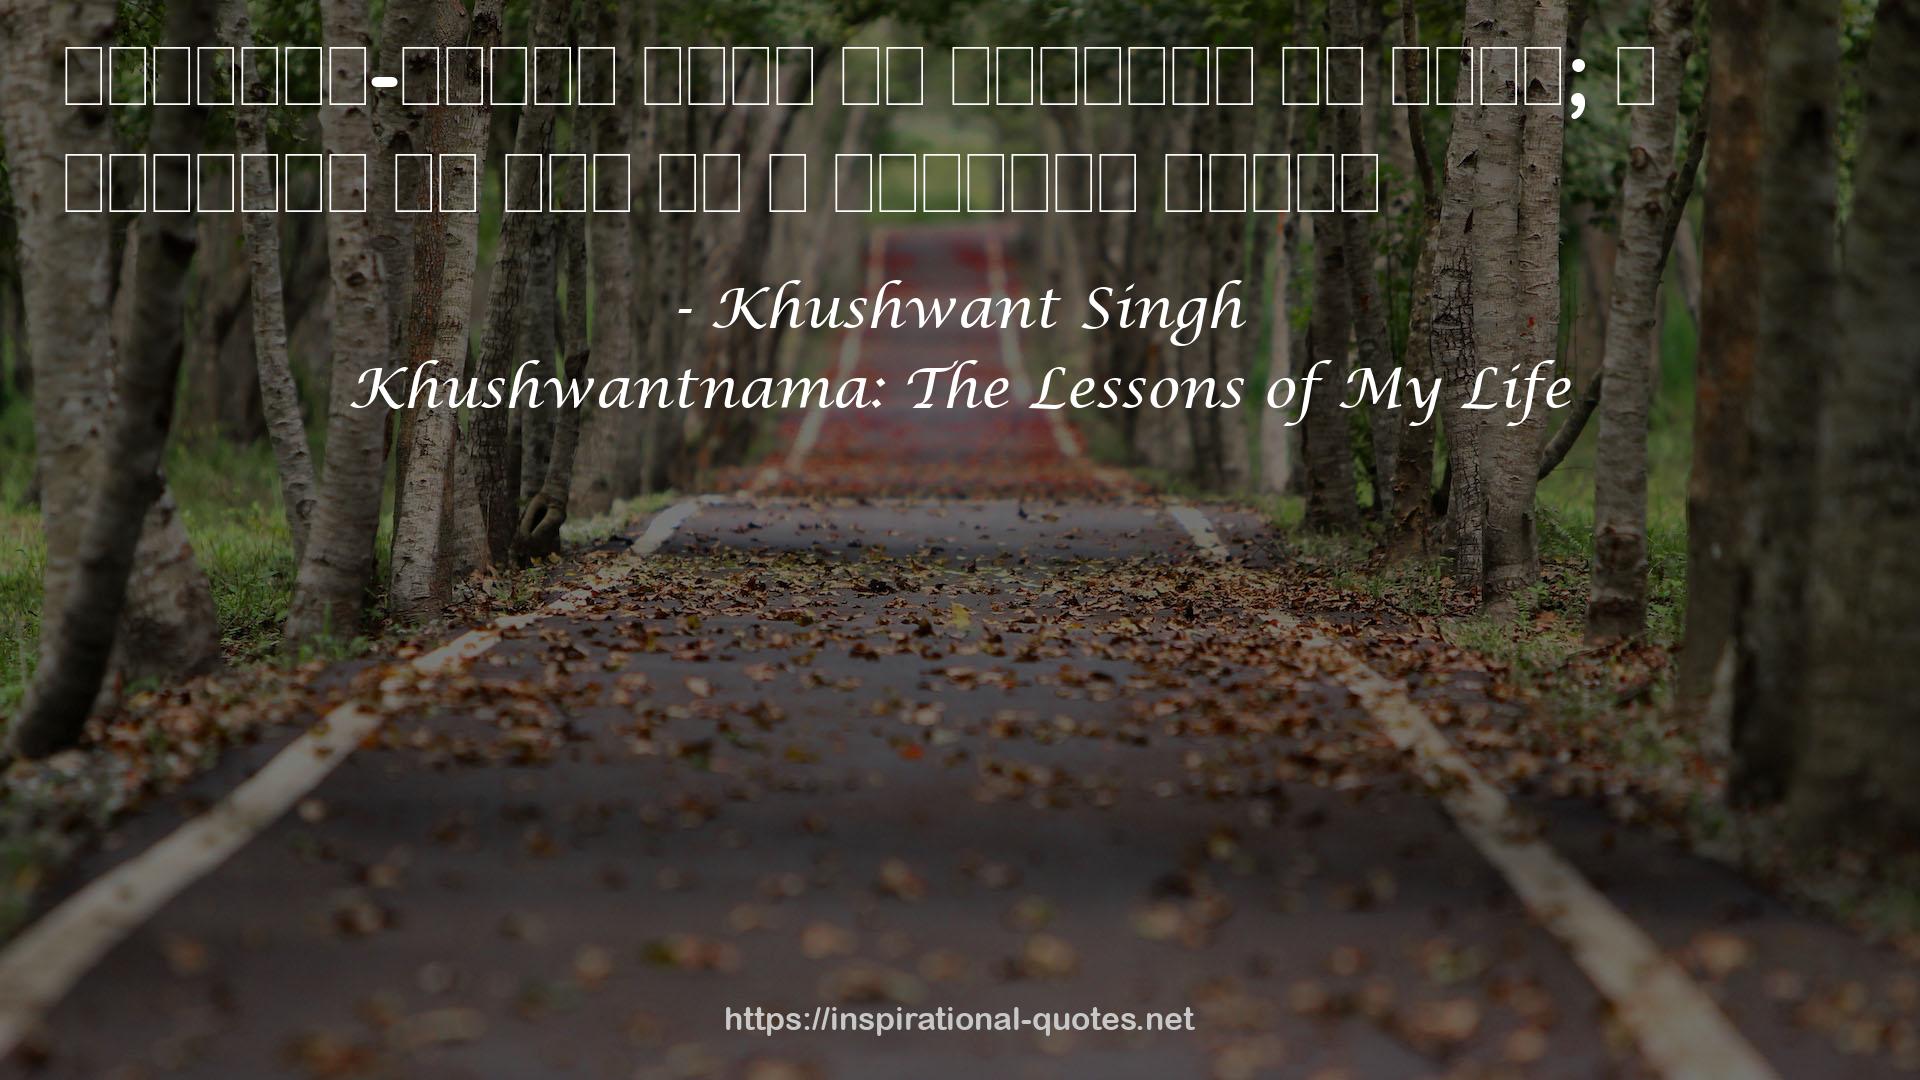 Khushwantnama: The Lessons of My Life QUOTES